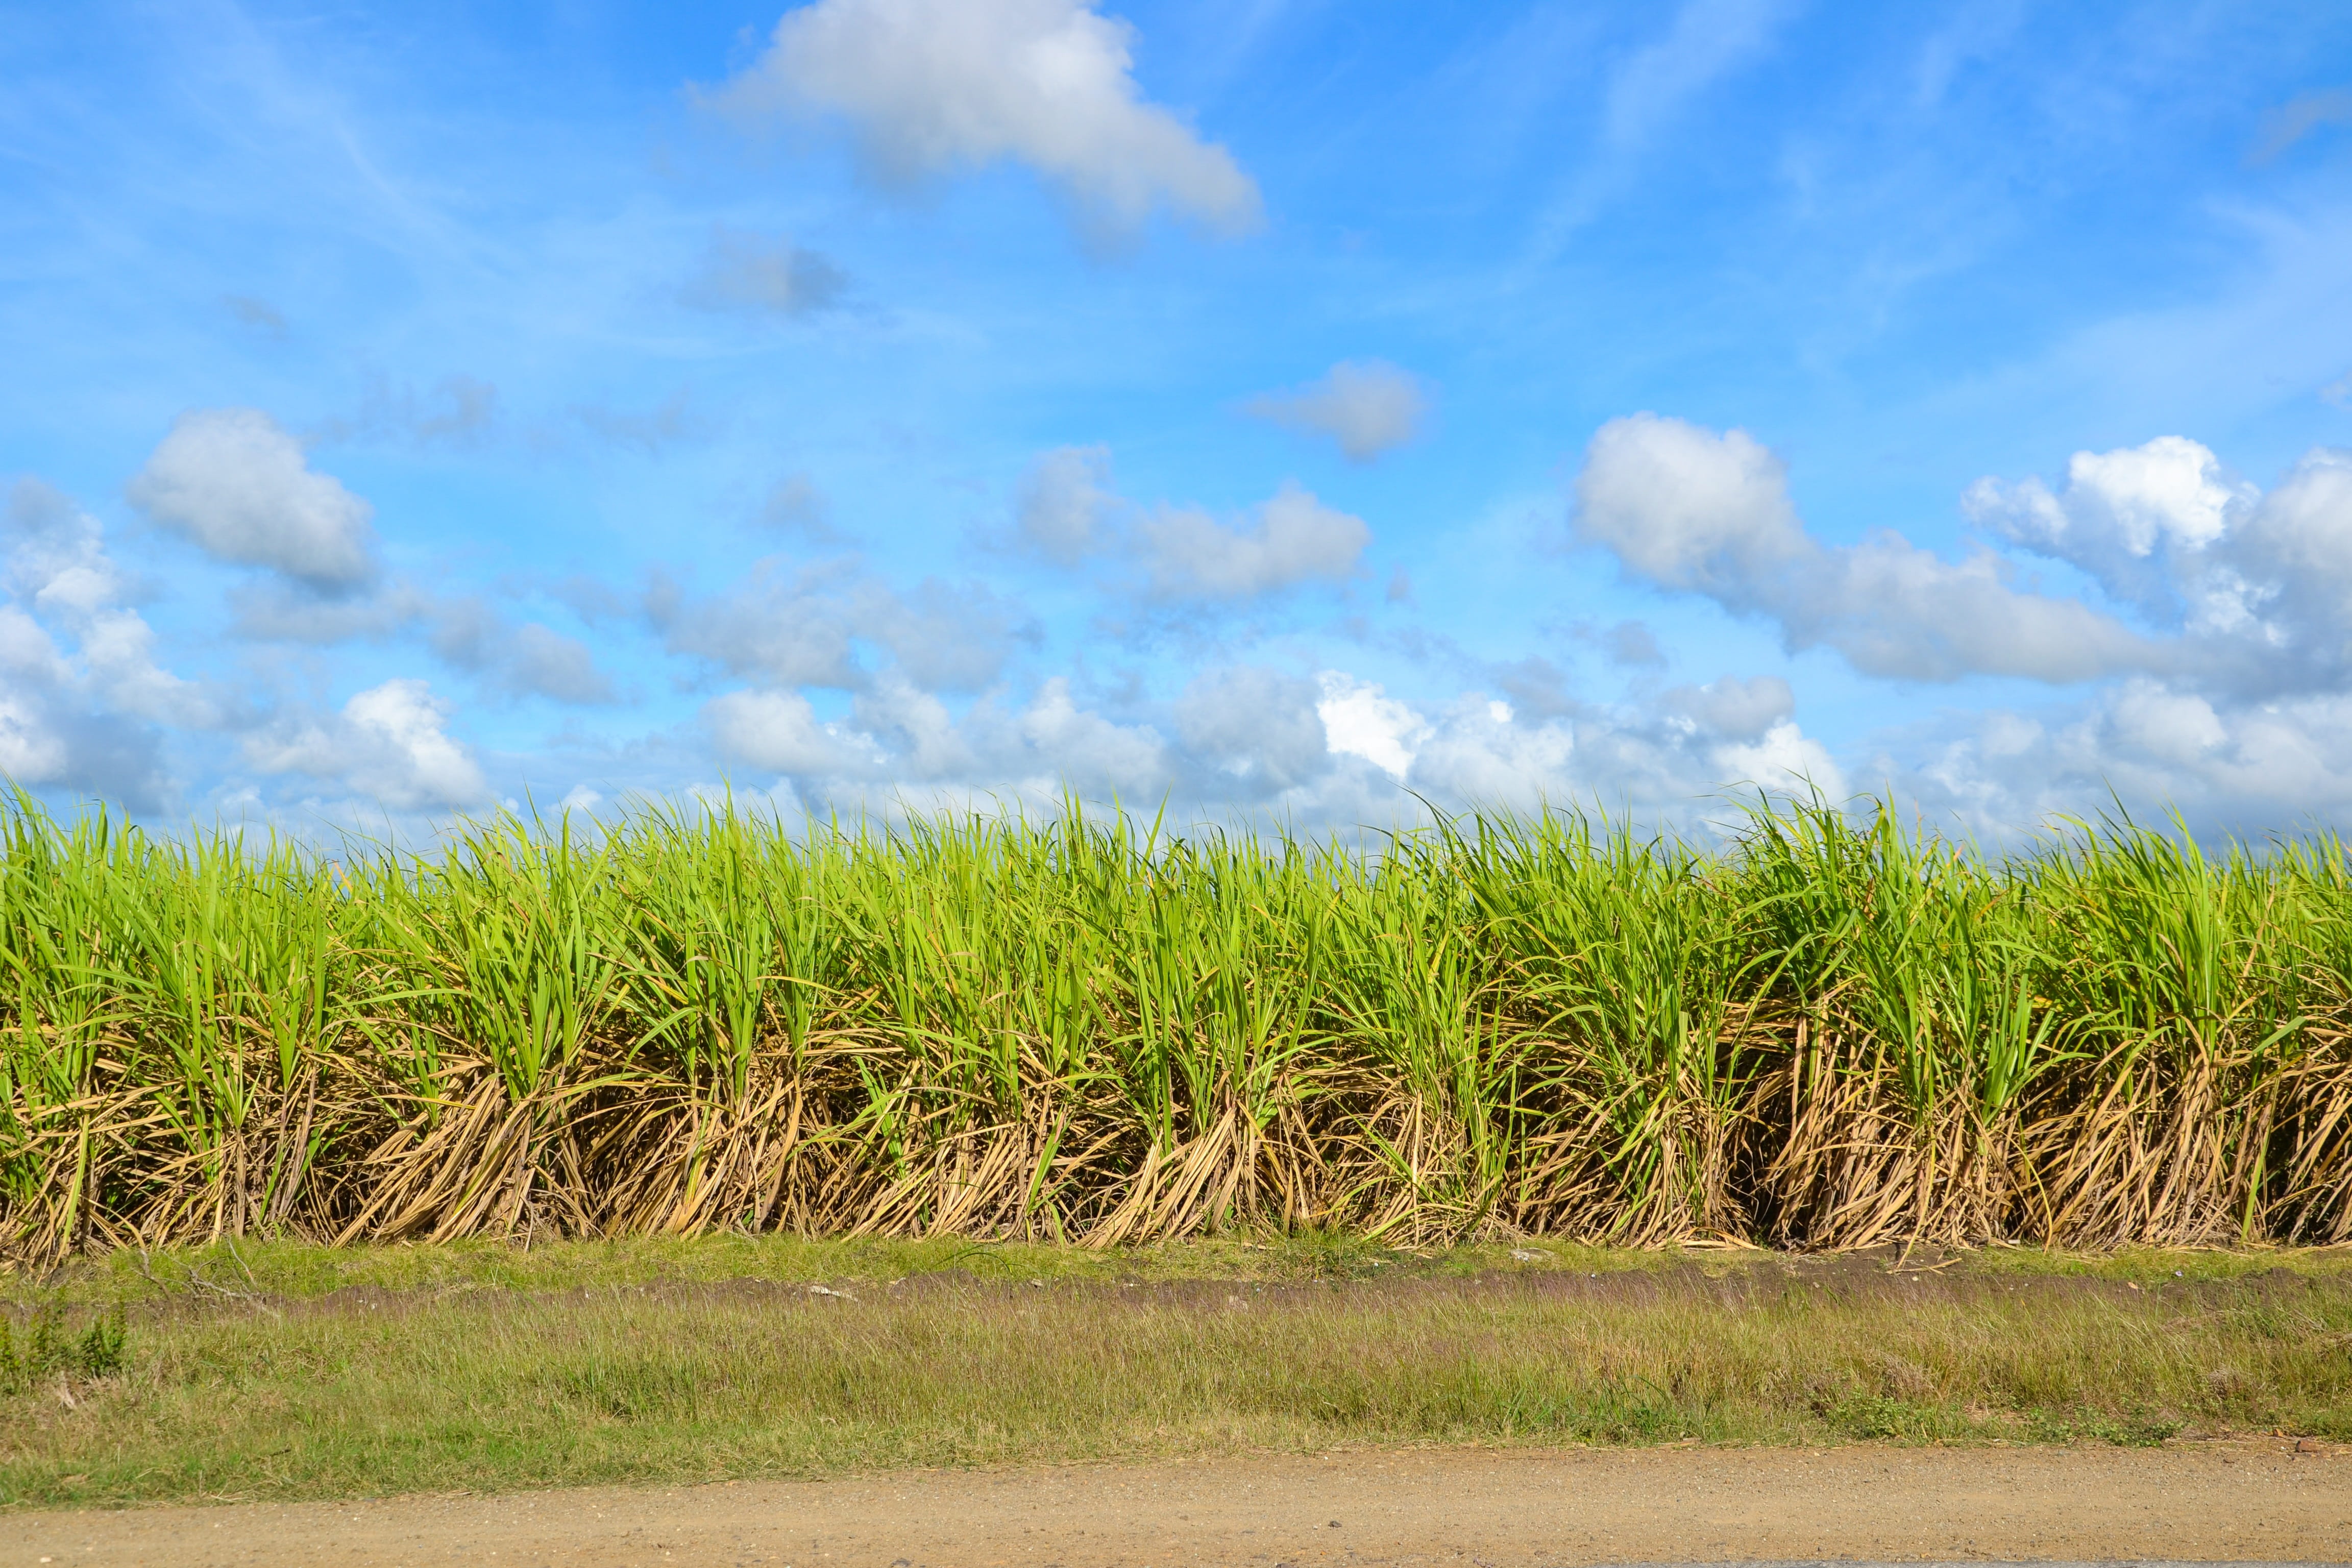 person shows green leafed plants during daytime, Sugar Cane, Field